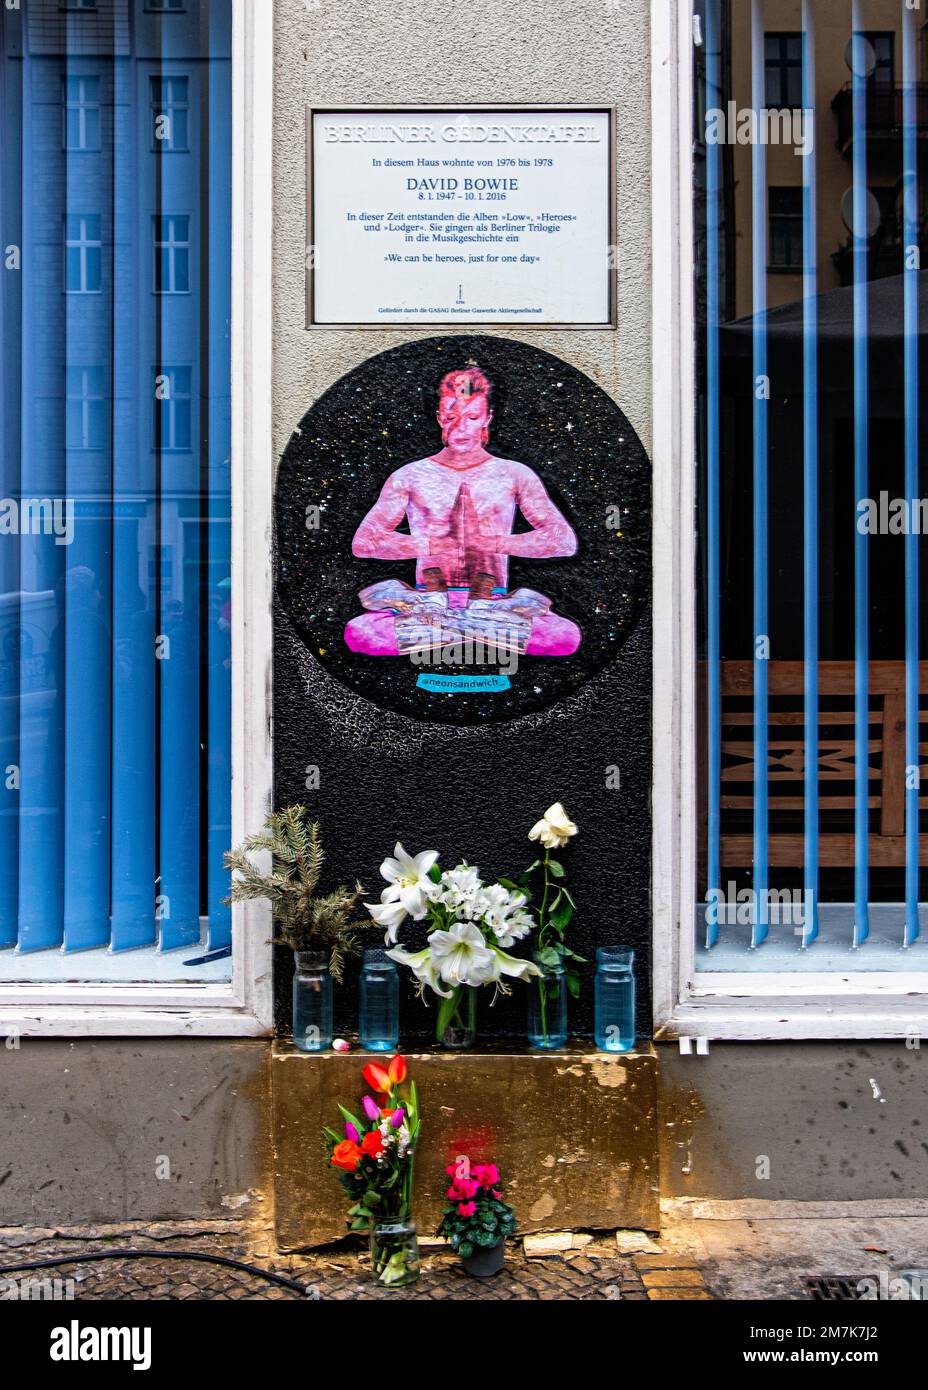 David Bowie Memorial. Memorial Plaque, Candles & flowers at Hauptstrasse 155, Berlin-Schoneberg, Germany. Bowie lived here from 1976-1978 Stock Photo